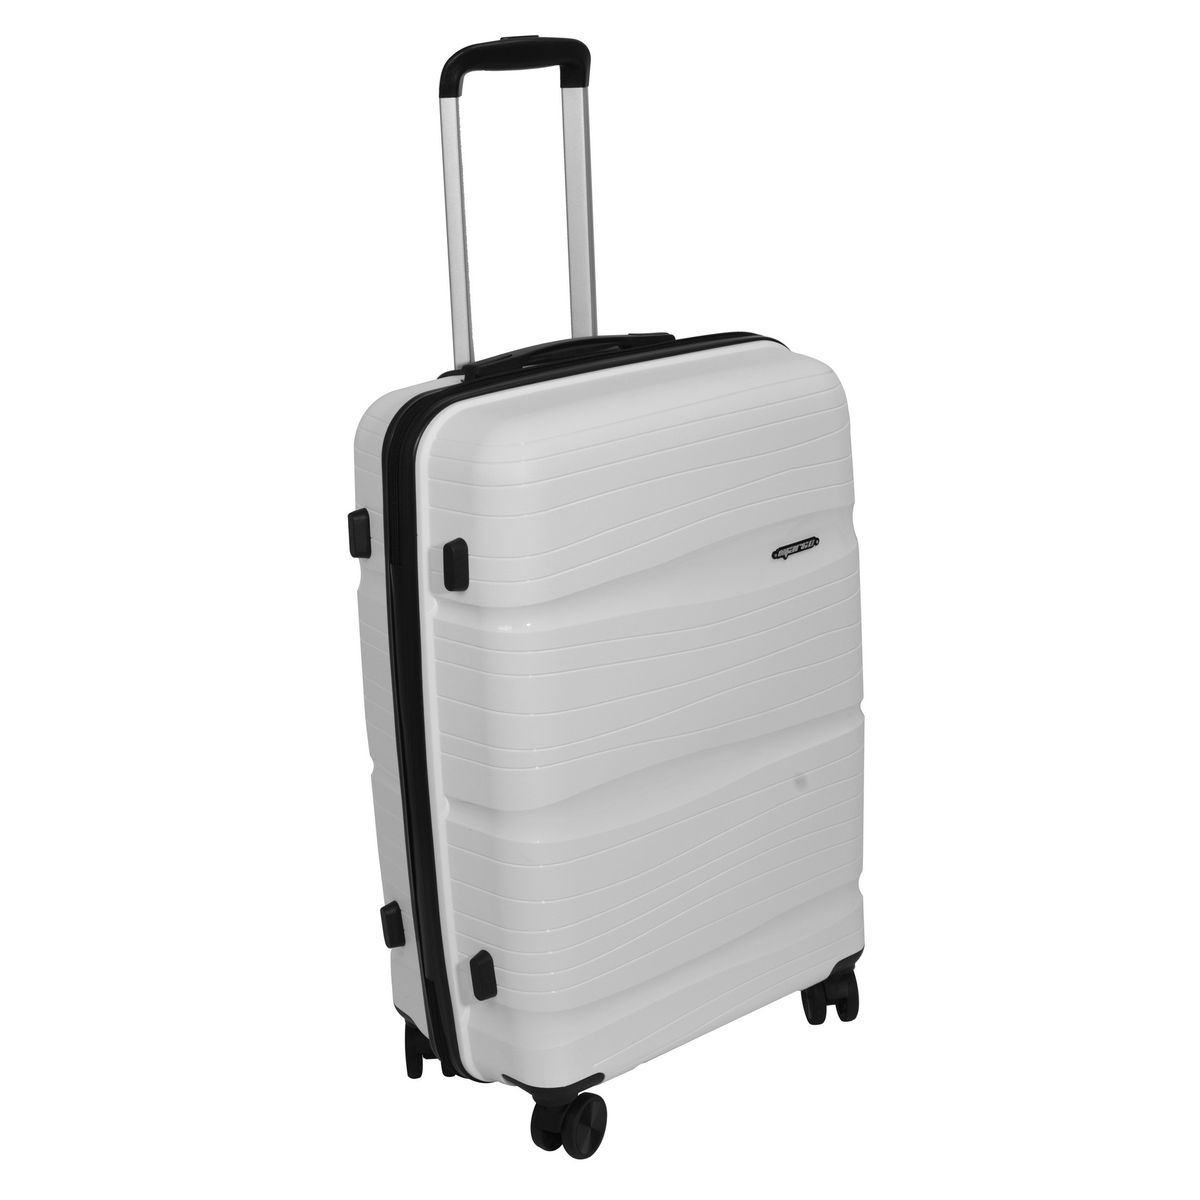 Marco Odyssey Light & Strong Polypropylene 24-inch Luggage Bag - White